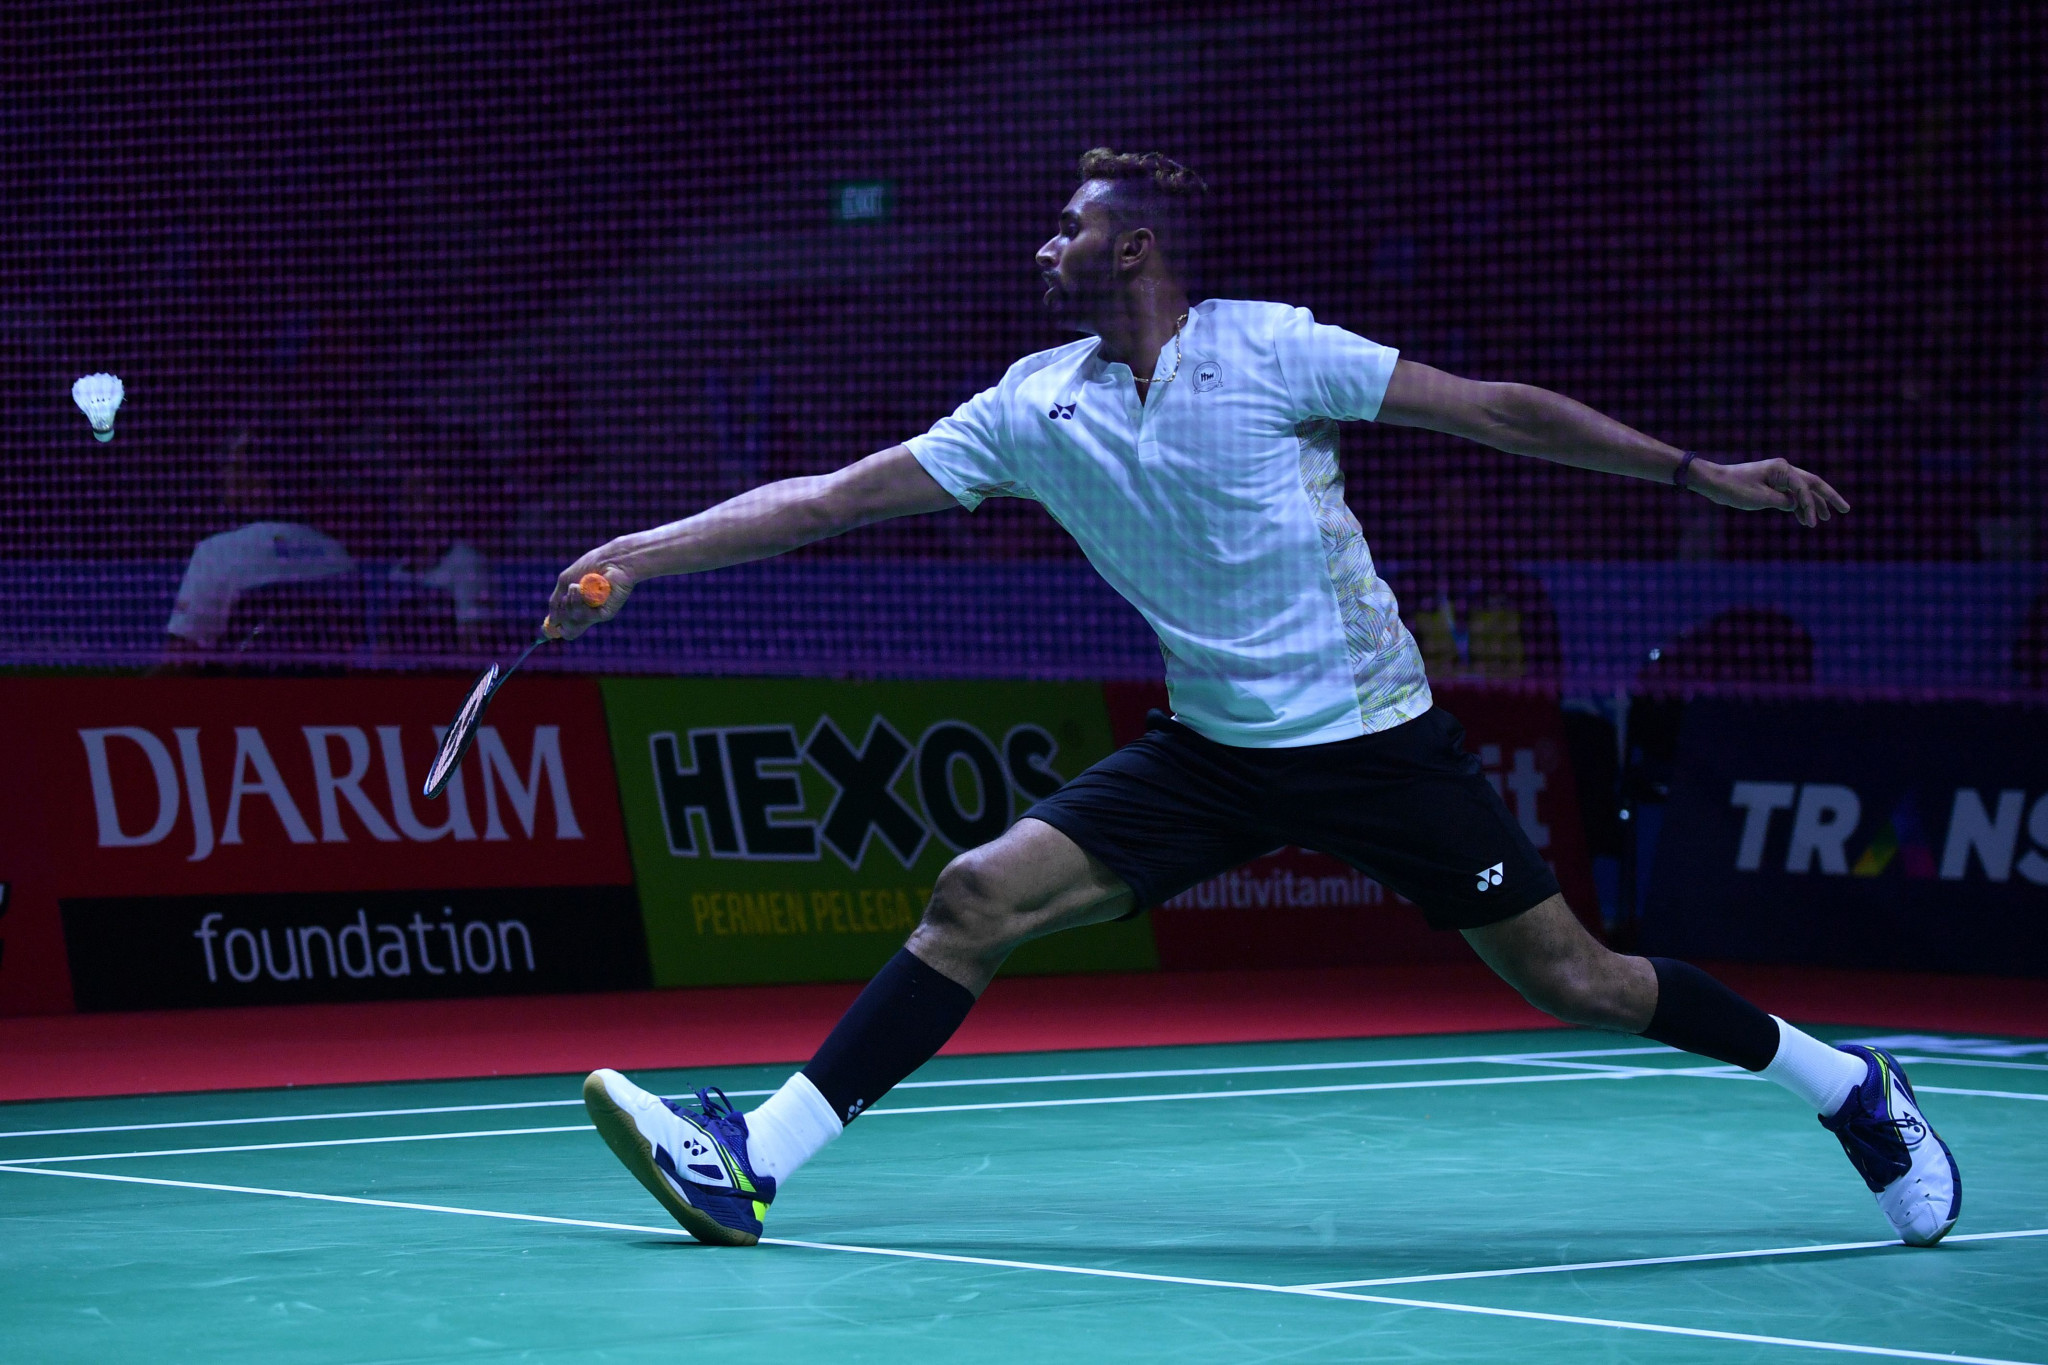 India's HS Prannoy was among the winners in the first round of the men's singles draw ©Getty Images